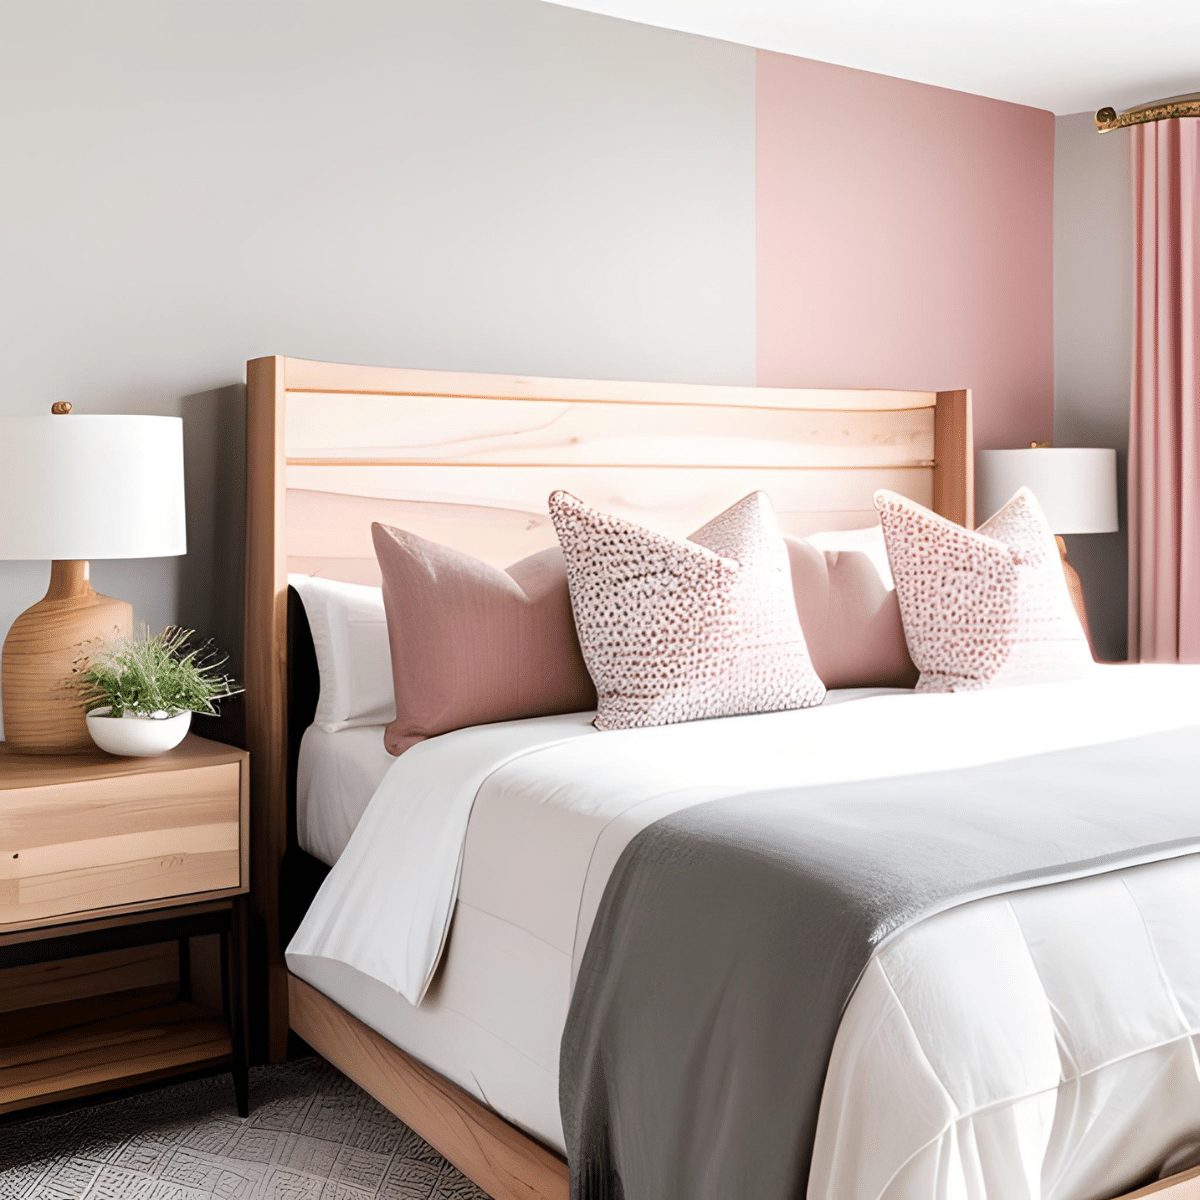 Bed with a blush-toned wood frame and headboard